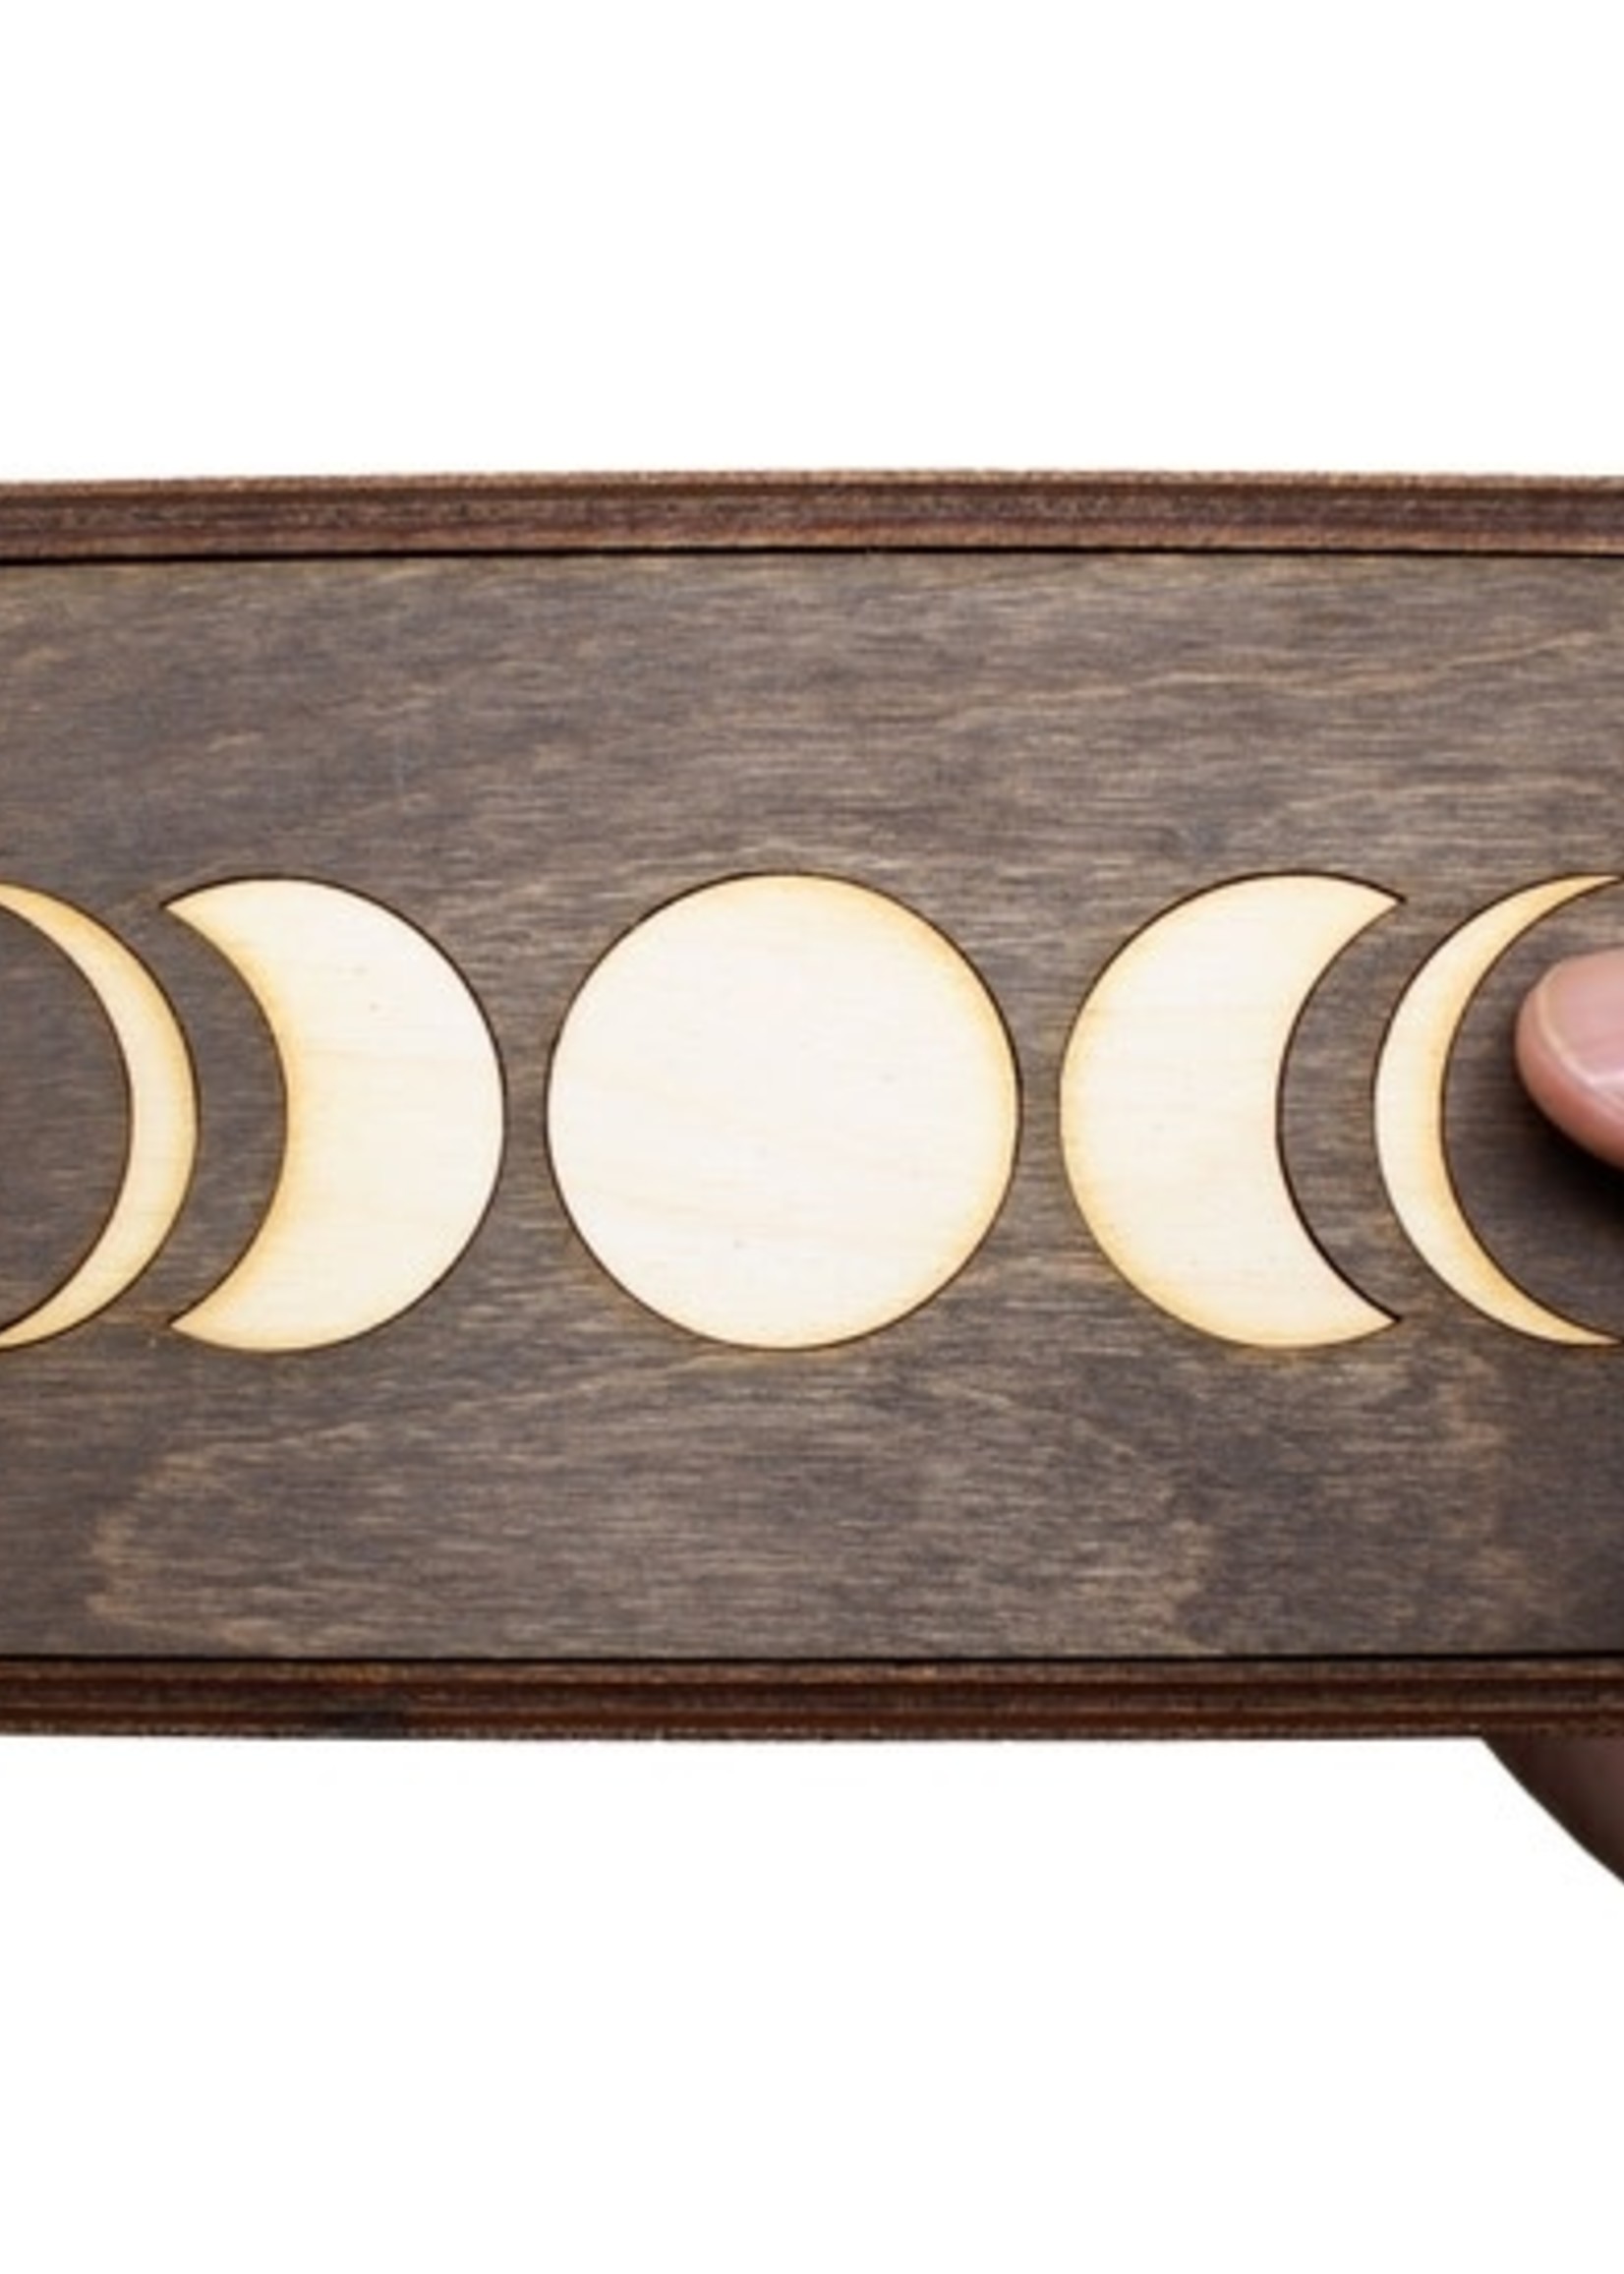 Most Amazing Boxes: Moon Phases Inlay 4x6